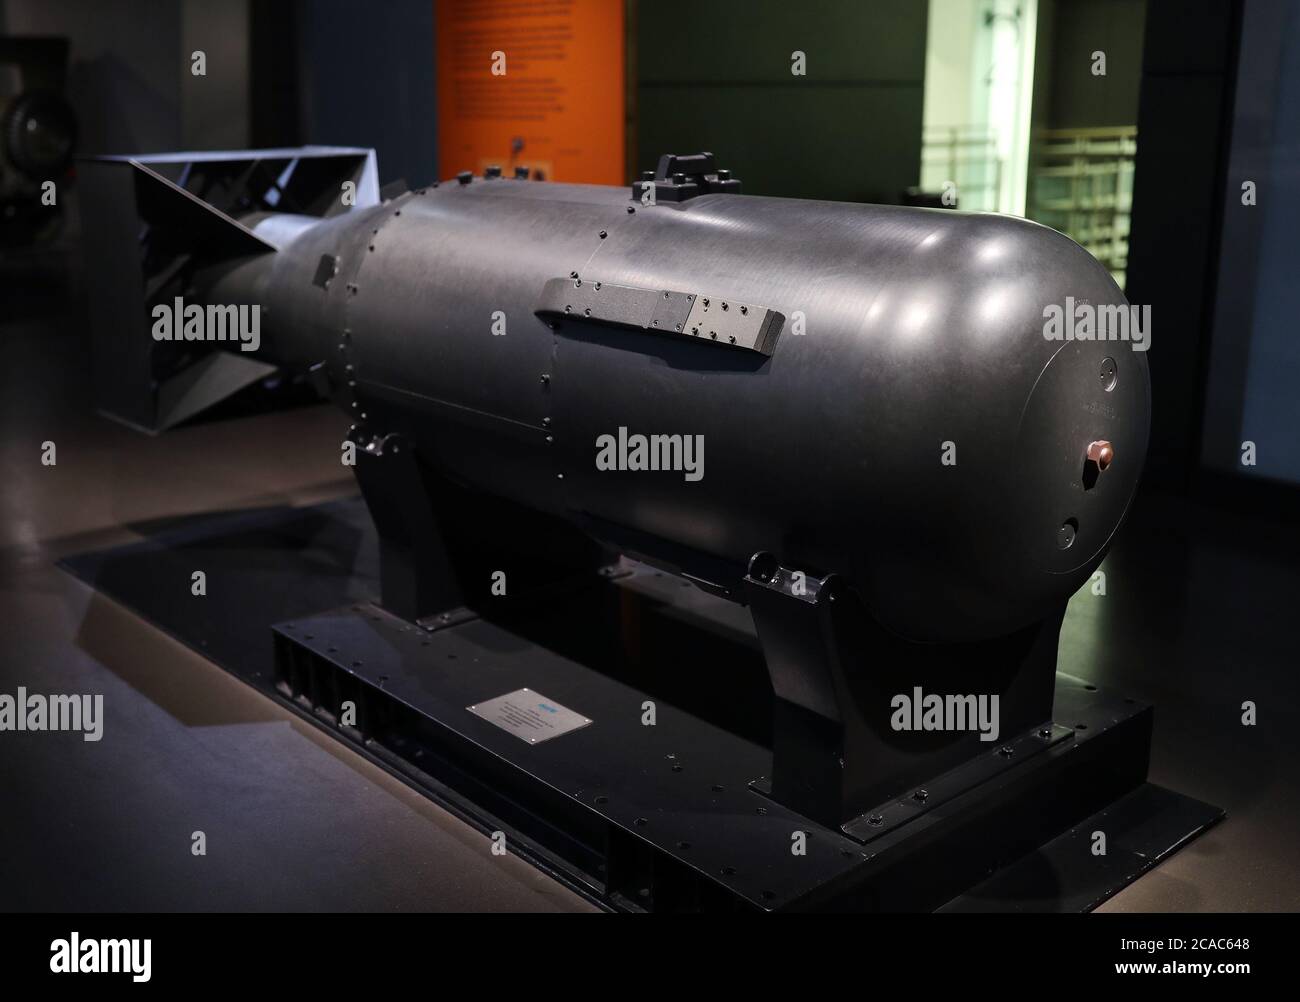 One of five casings made for the 'Little Boy' atomic bomb that was dropped on Hiroshima, Japan, on August 6 1945, on display at the Imperial War Museum London, on the 75th anniversary of the bombings of Hiroshima and Nagasaki. Stock Photo